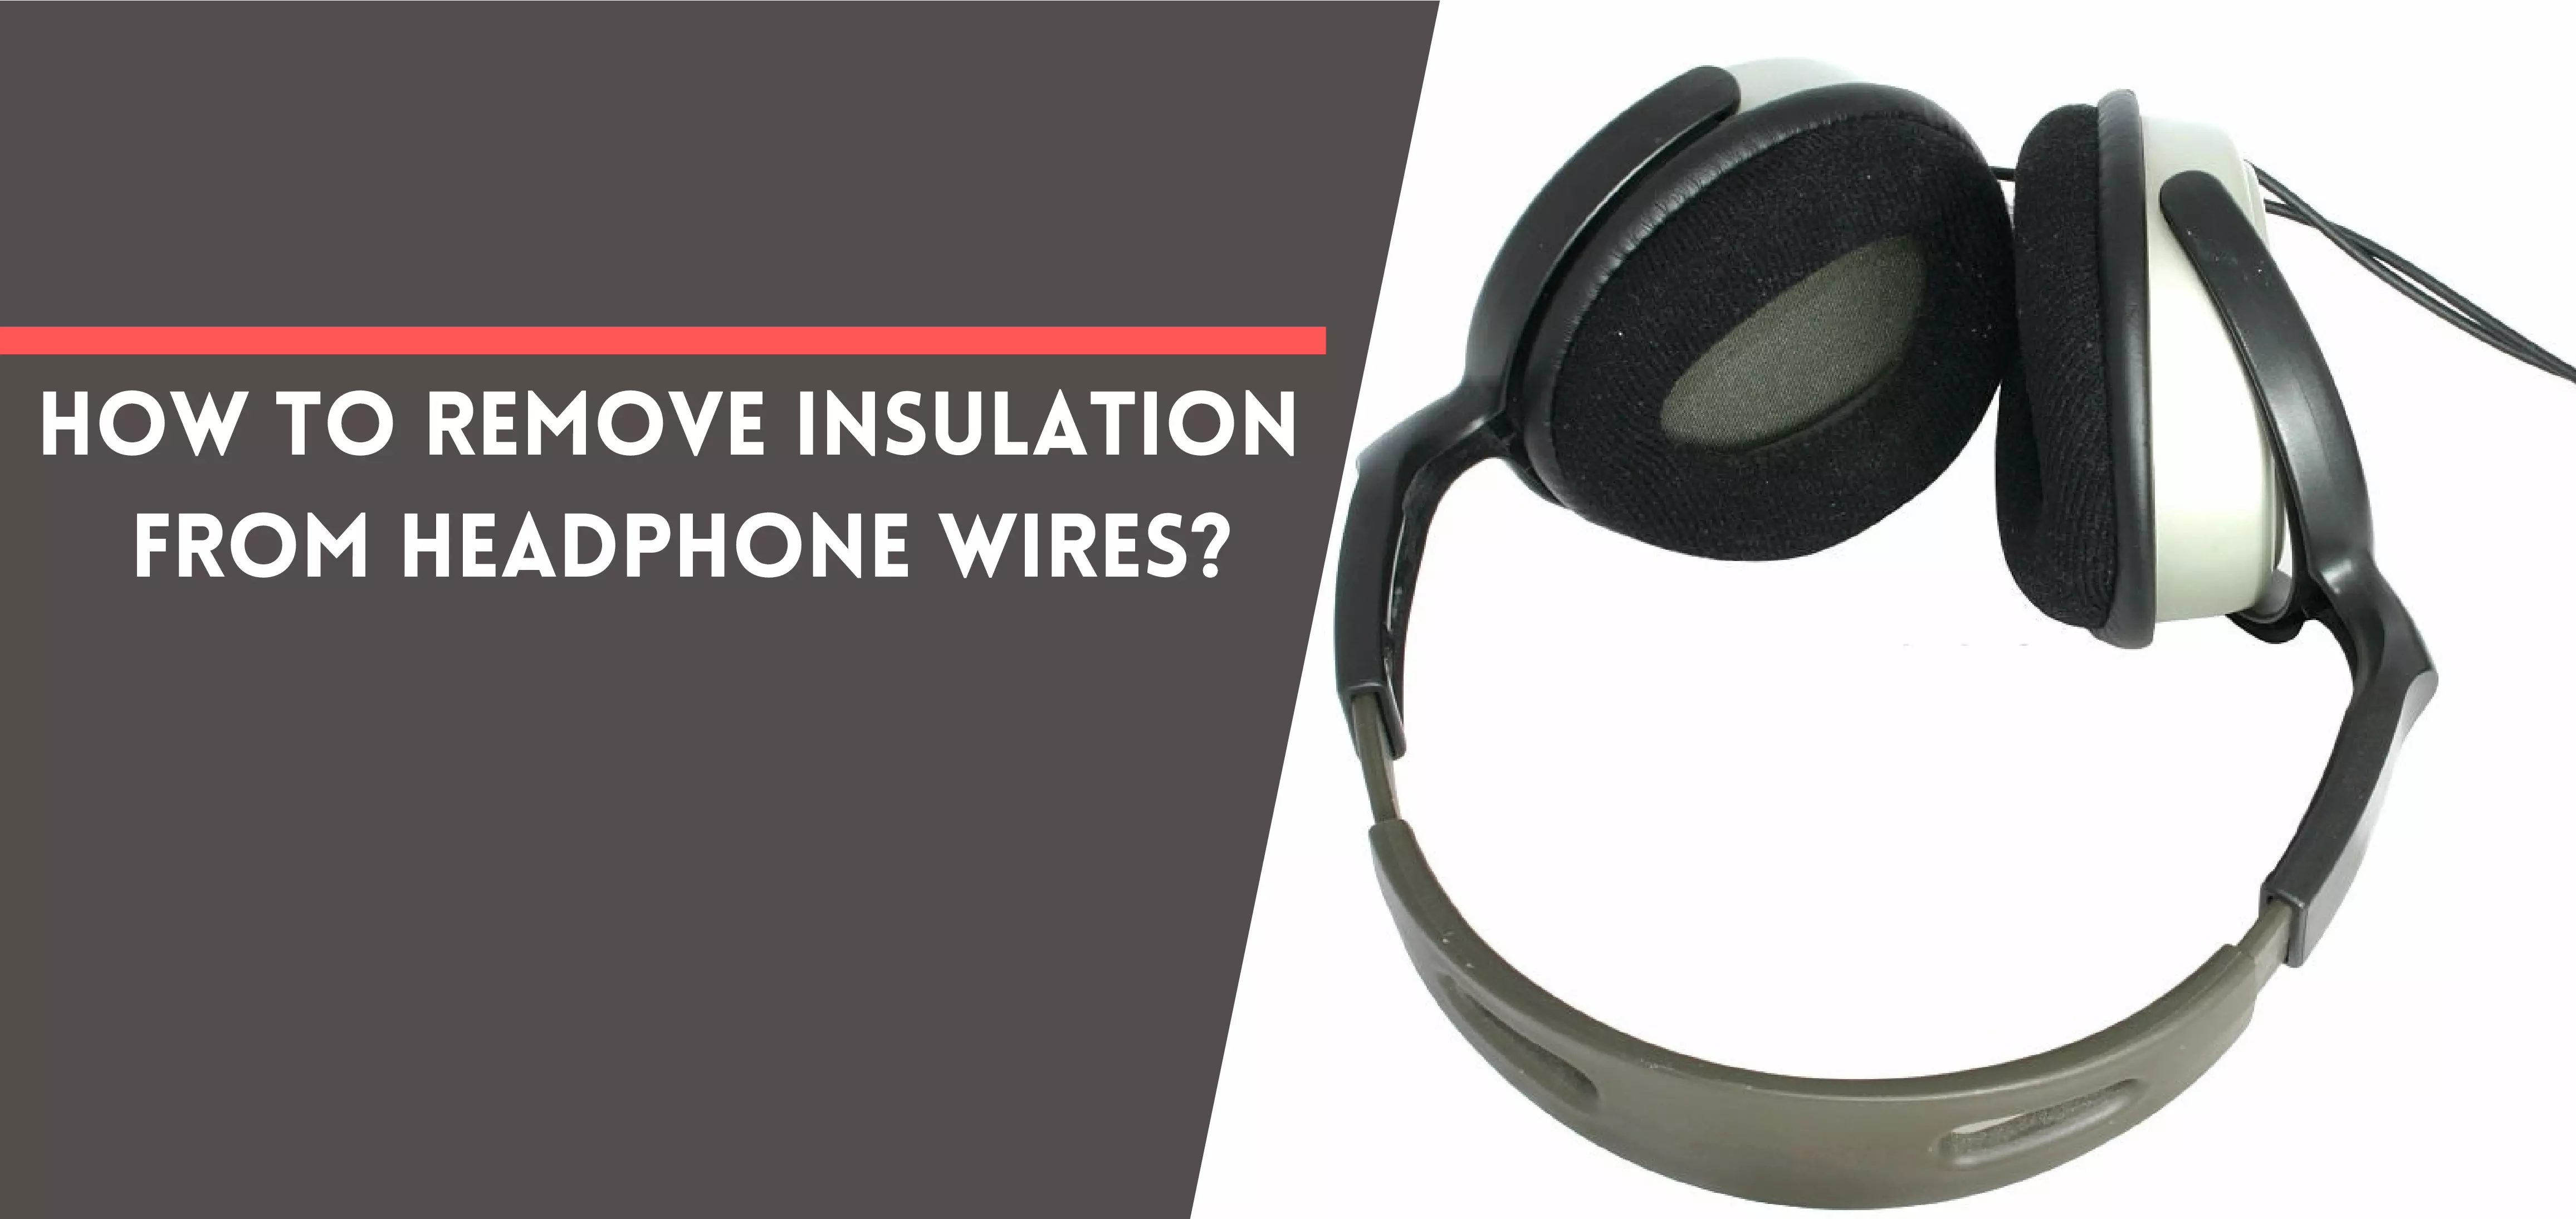 How To Remove Insulation From Headphone Wires